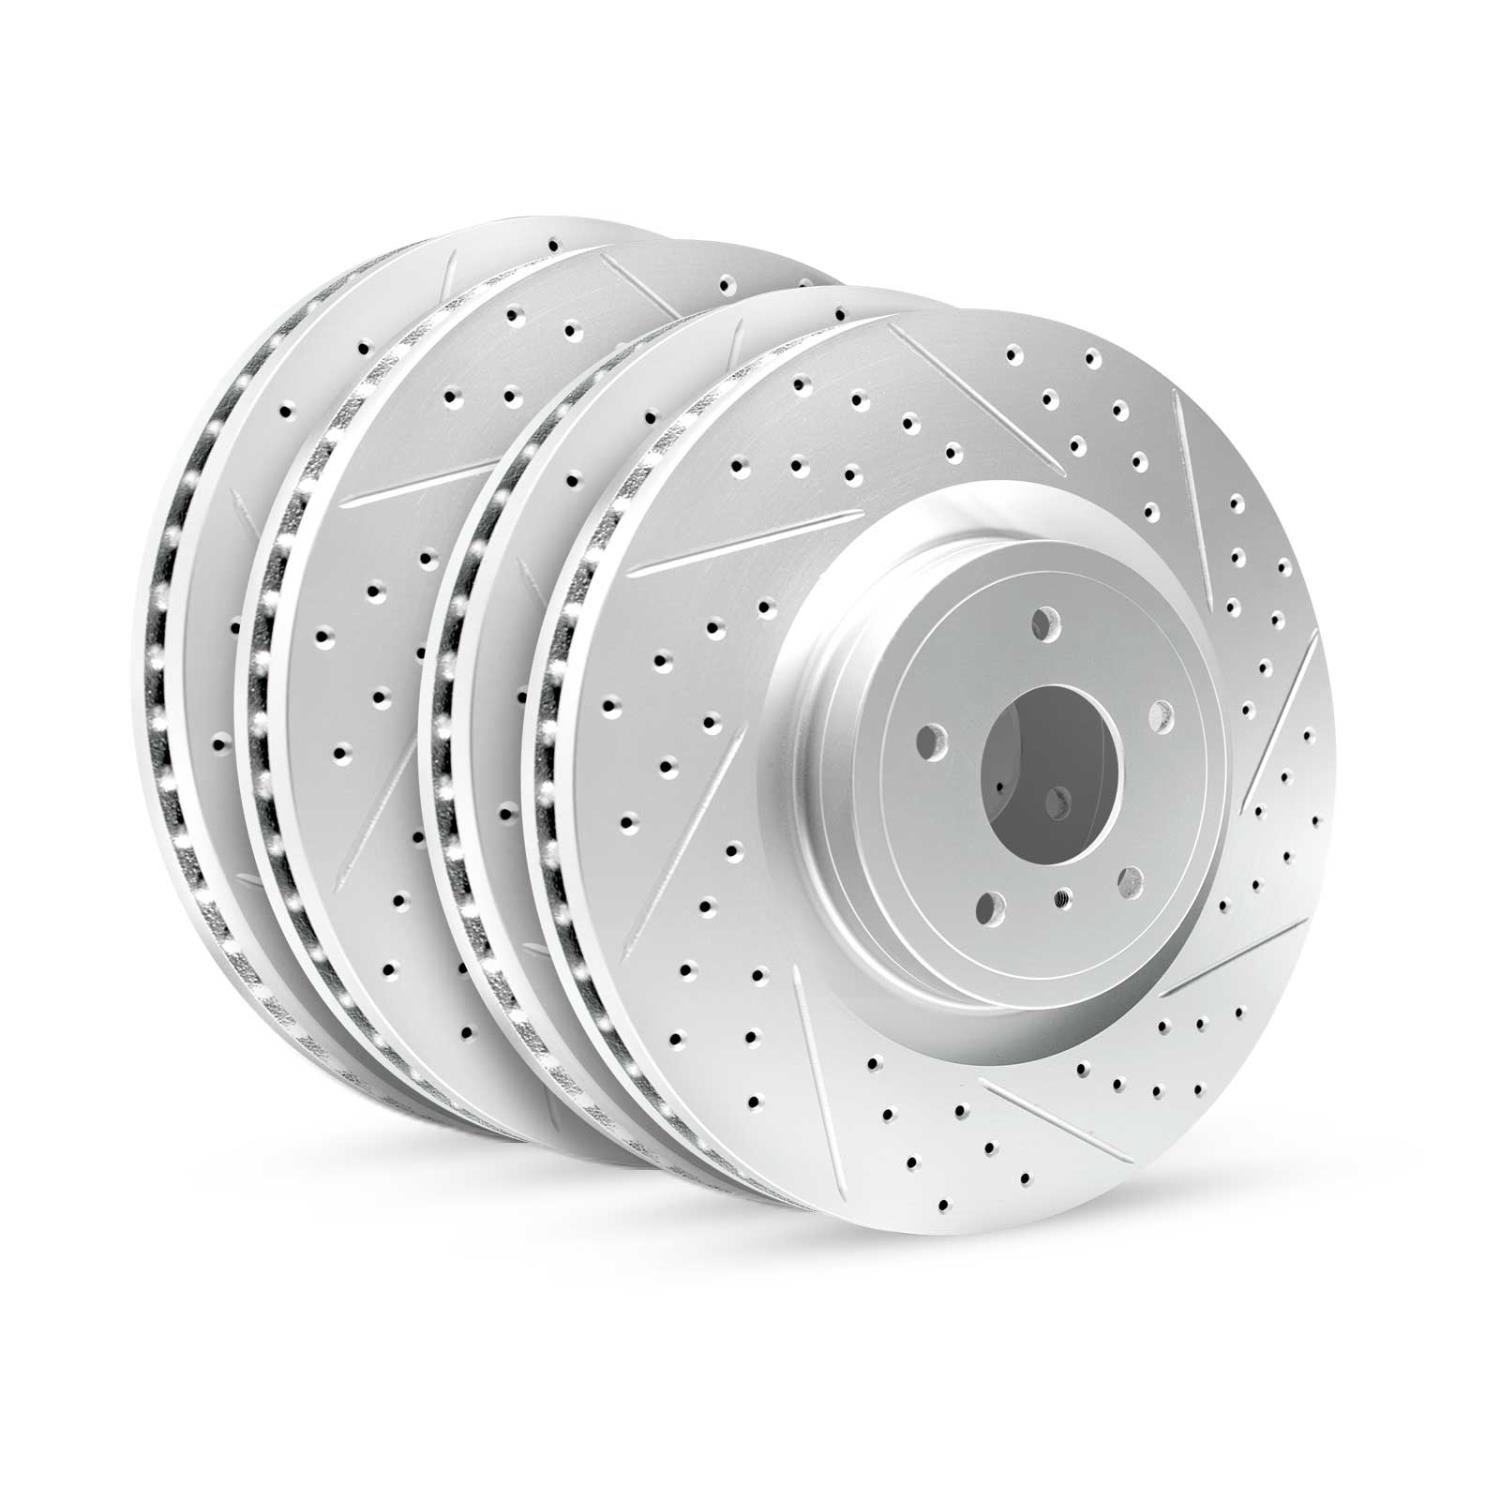 GEO-Carbon Drilled/Slotted Rotors, 2010-2013 Kia/Hyundai/Genesis, Position: Front/Rear